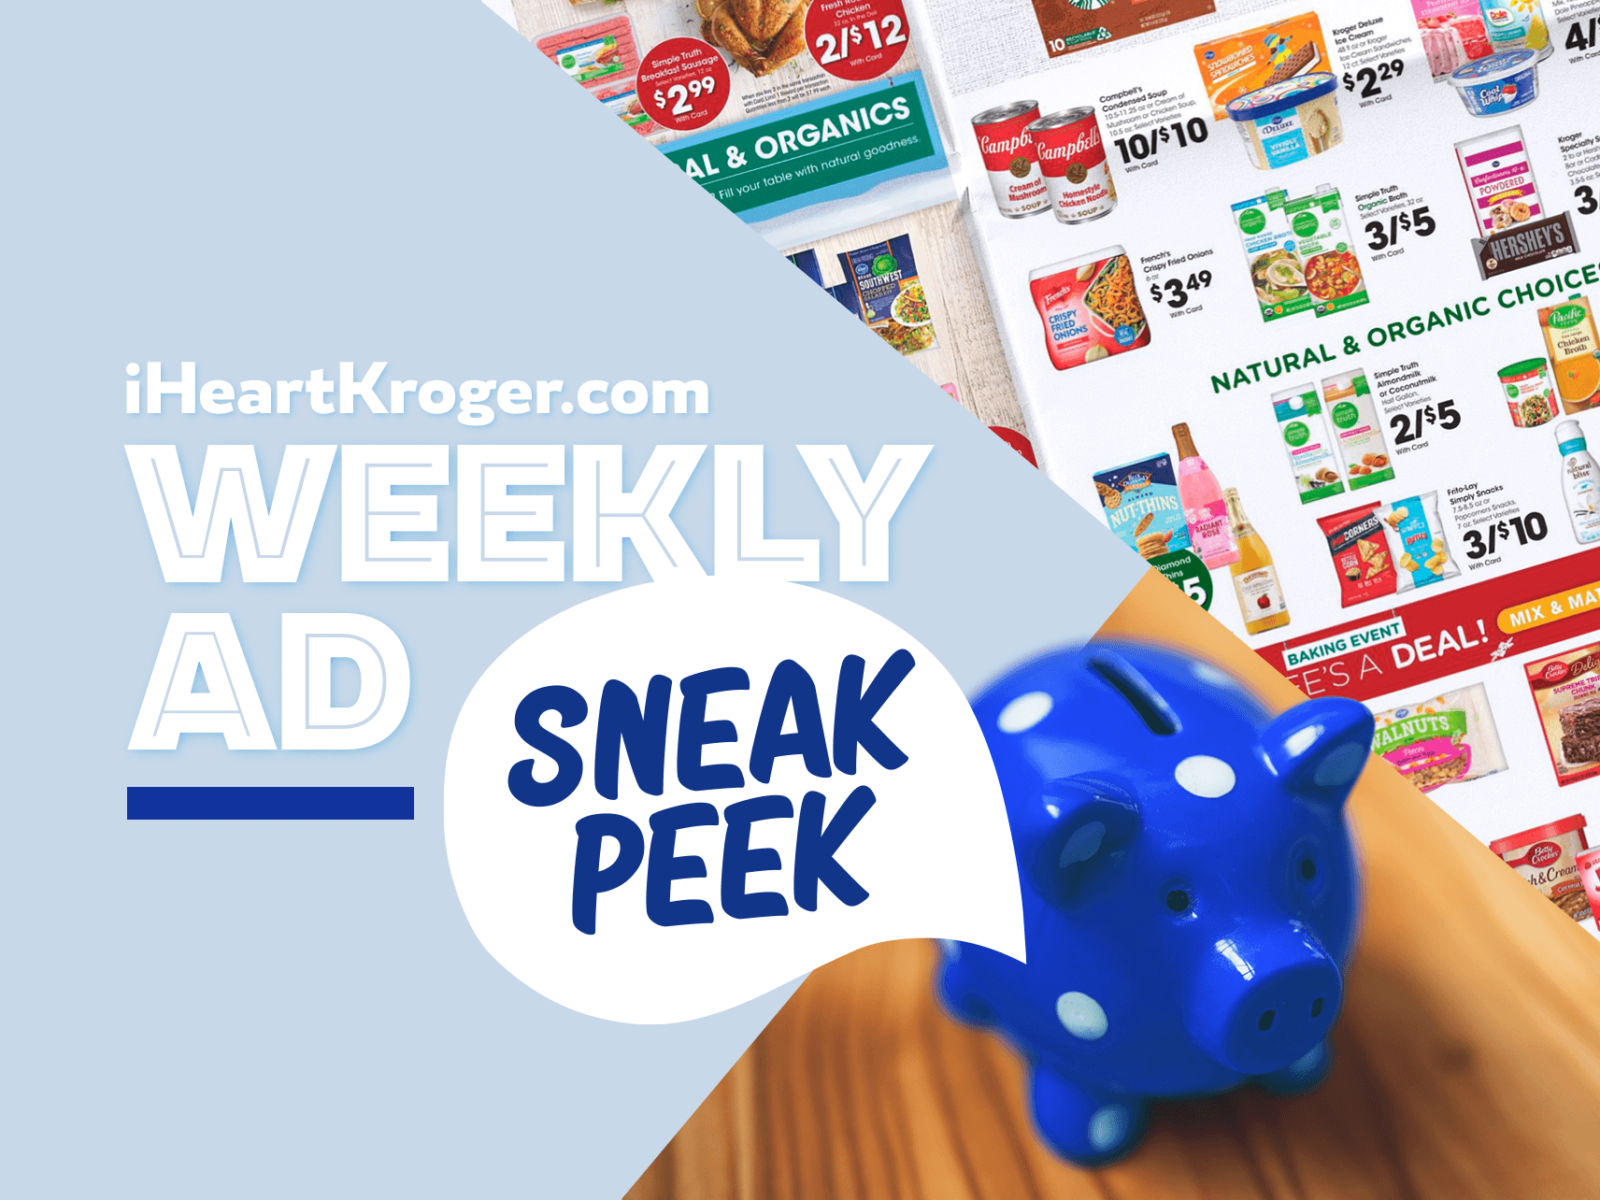 Kroger Ad & Coupons Week Of 5/15 to 5/21 – Mega Sale Continues!